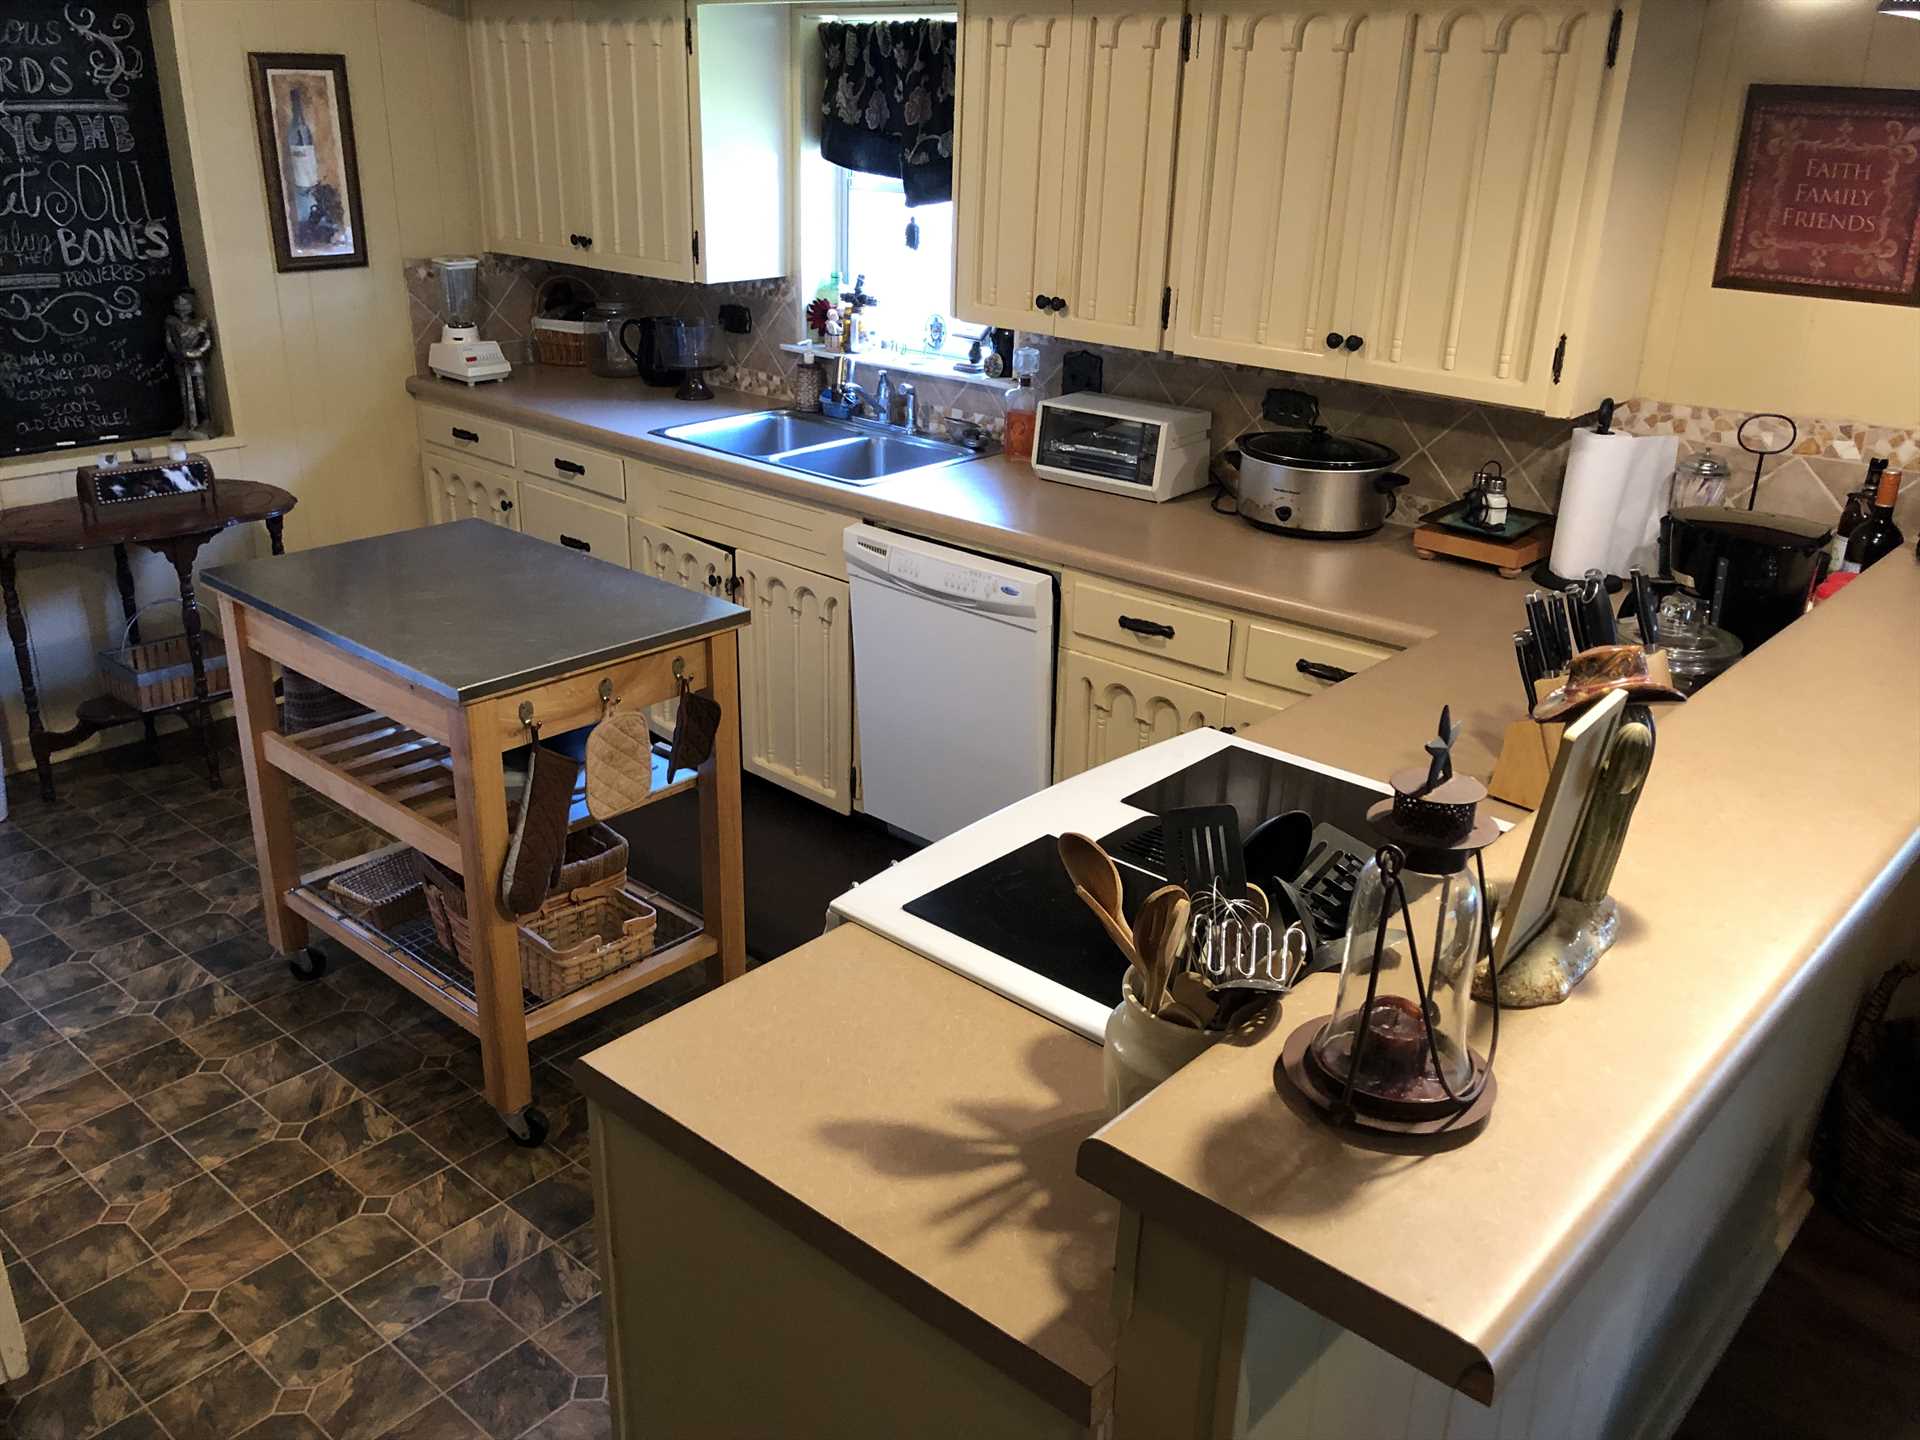                                                 The big country kitchen is stocked with all the appliances and utensils your crew will need for a delicious home-cooked meal!